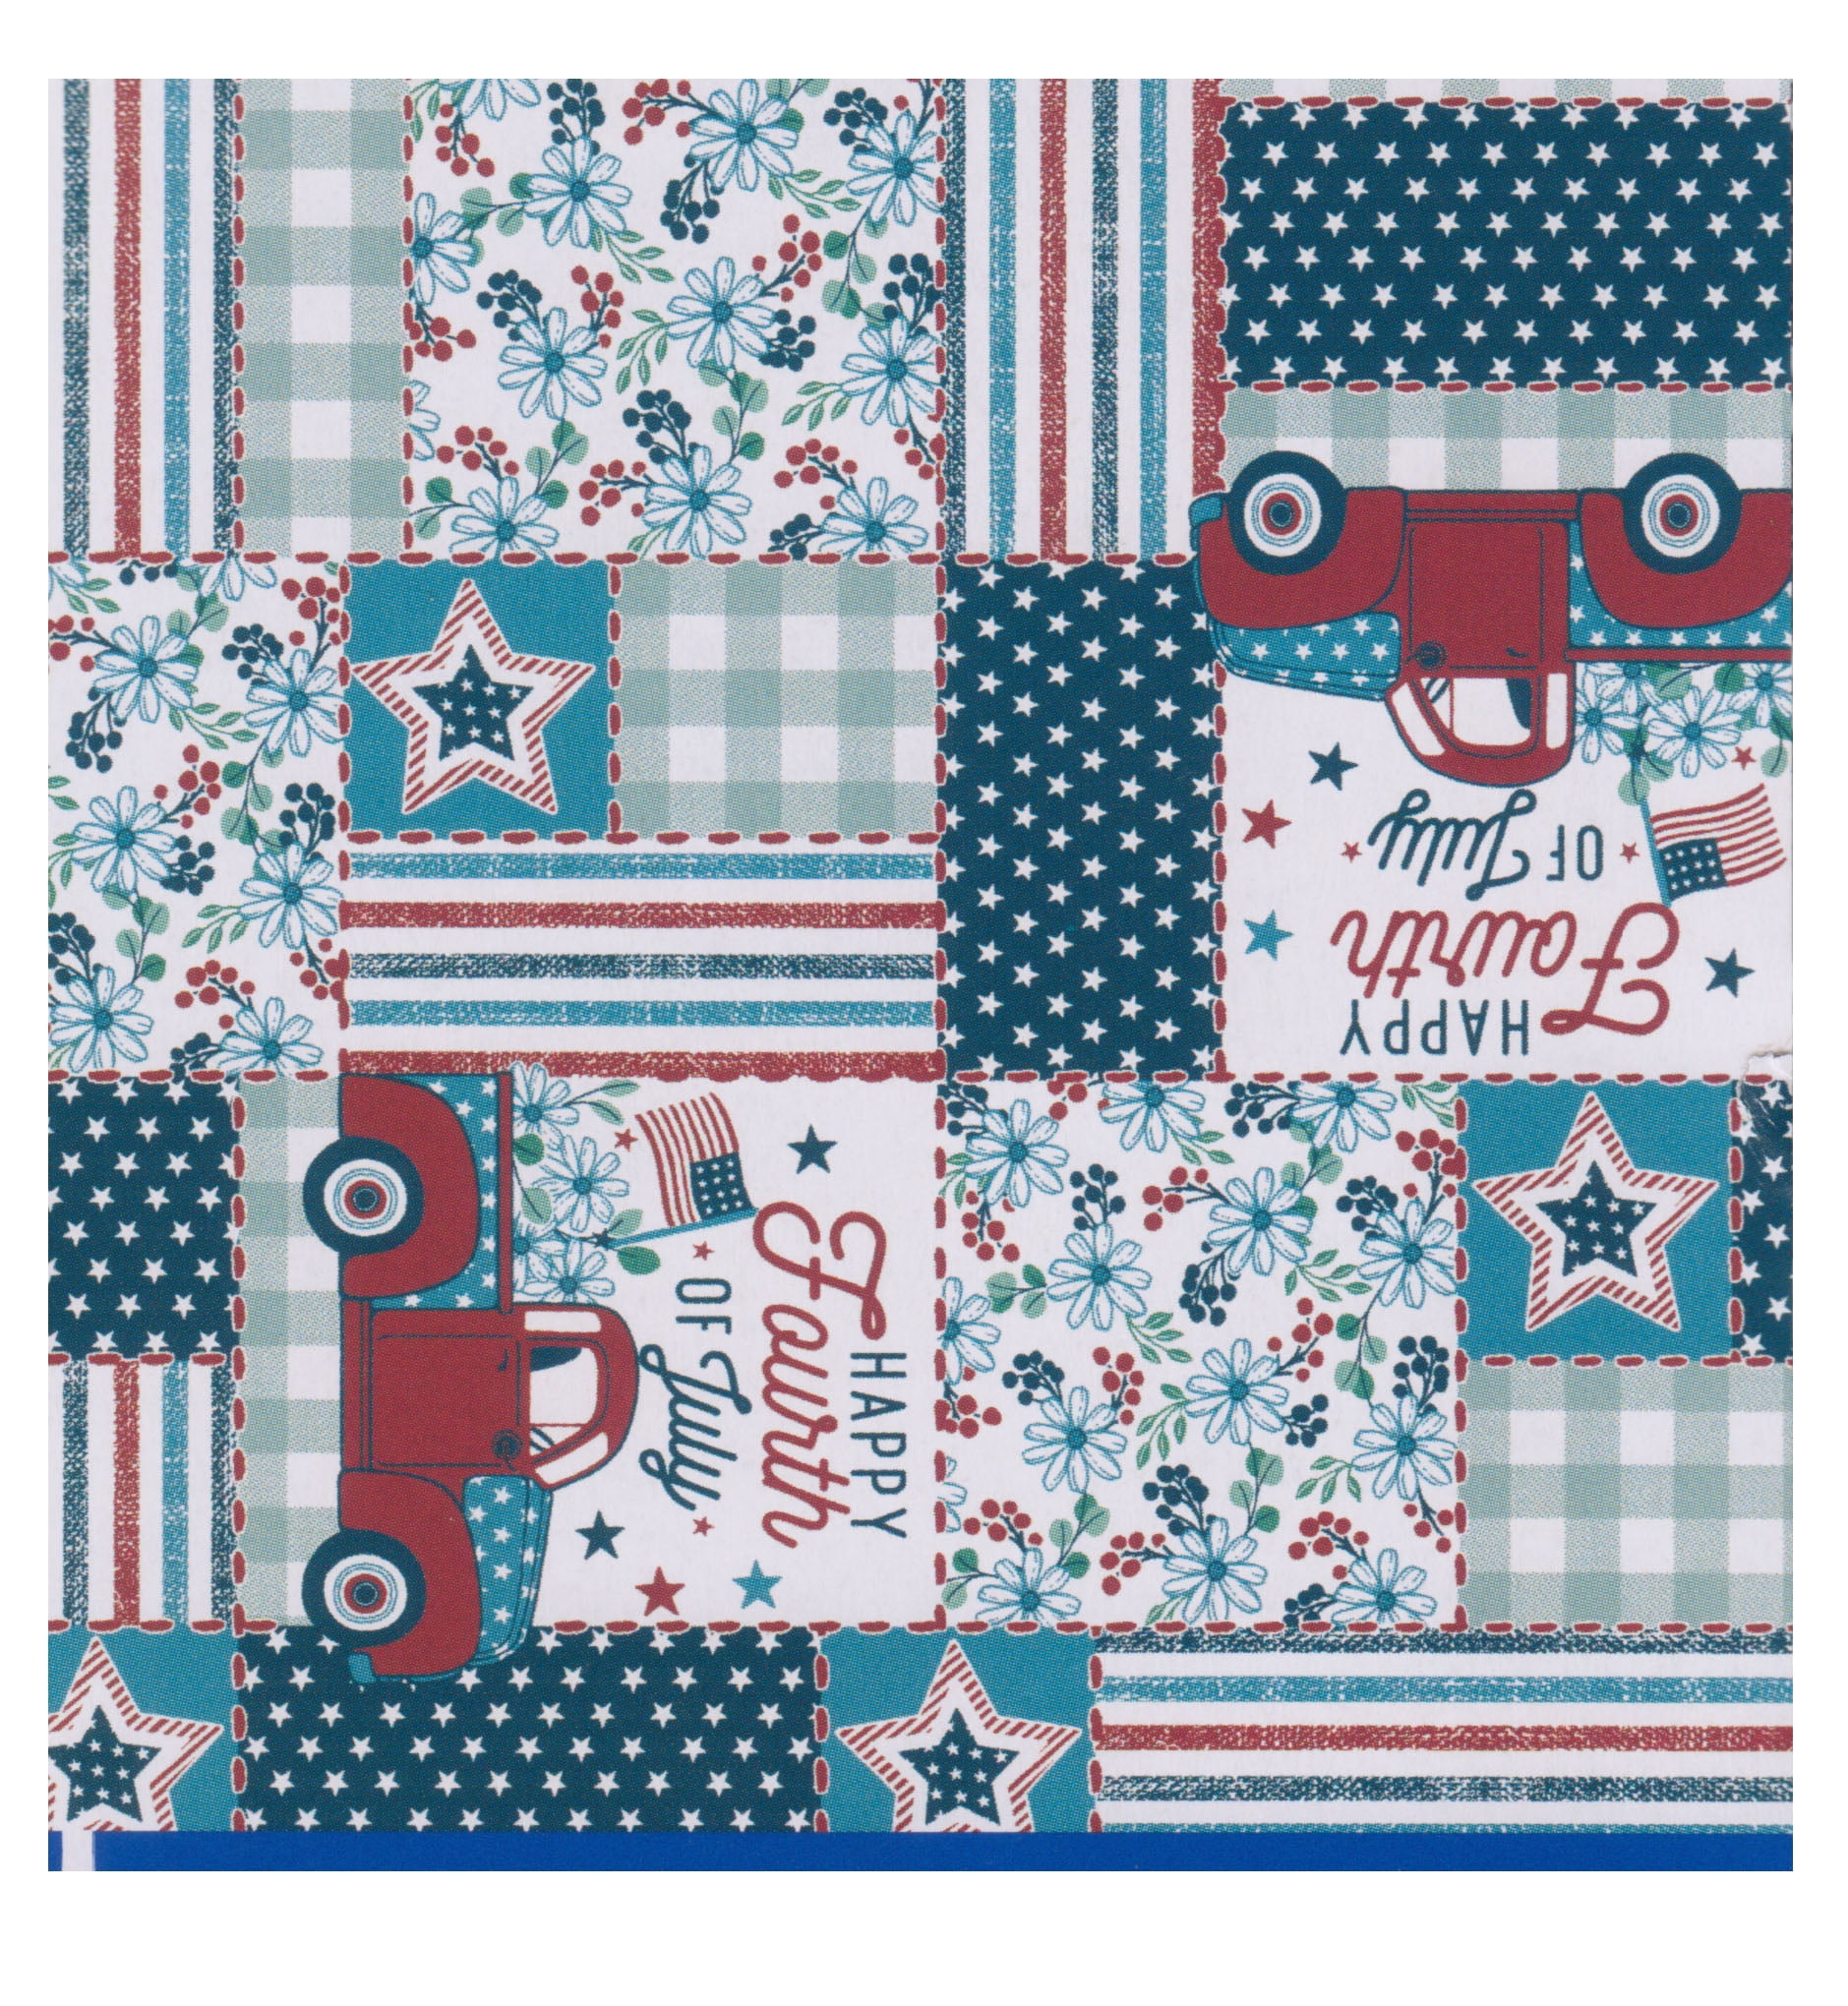 Patriotic Fireworks PEVA Vinyl Tablecloth Red White and Blue Flannel Backed Americana Rectangle Patriotic Blue & White Stars, 52 x 70